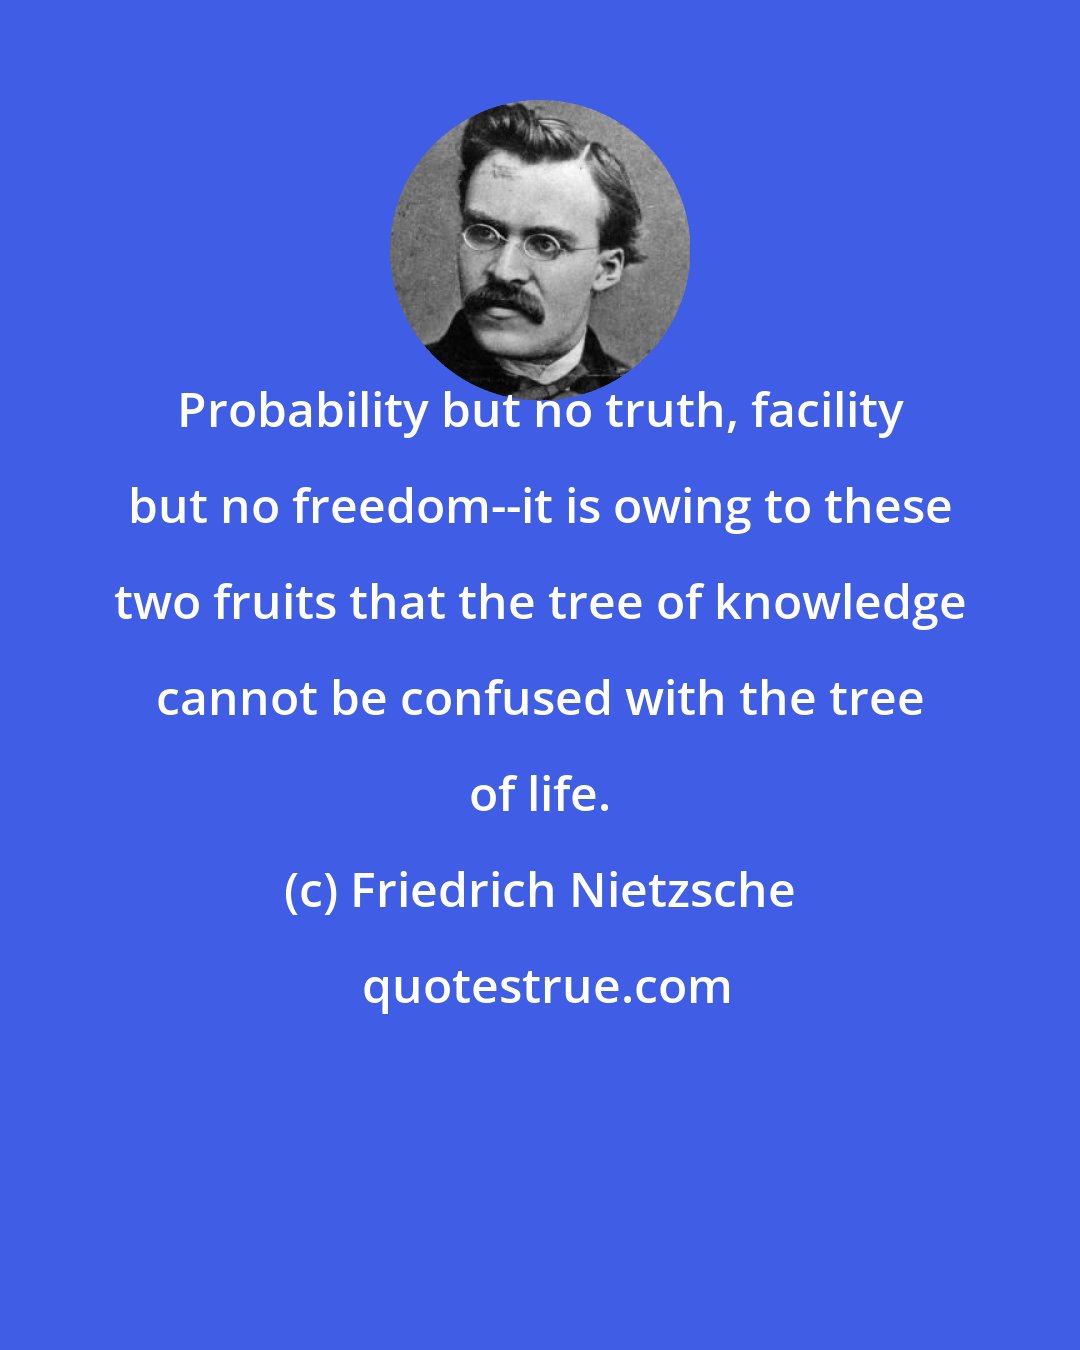 Friedrich Nietzsche: Probability but no truth, facility but no freedom--it is owing to these two fruits that the tree of knowledge cannot be confused with the tree of life.